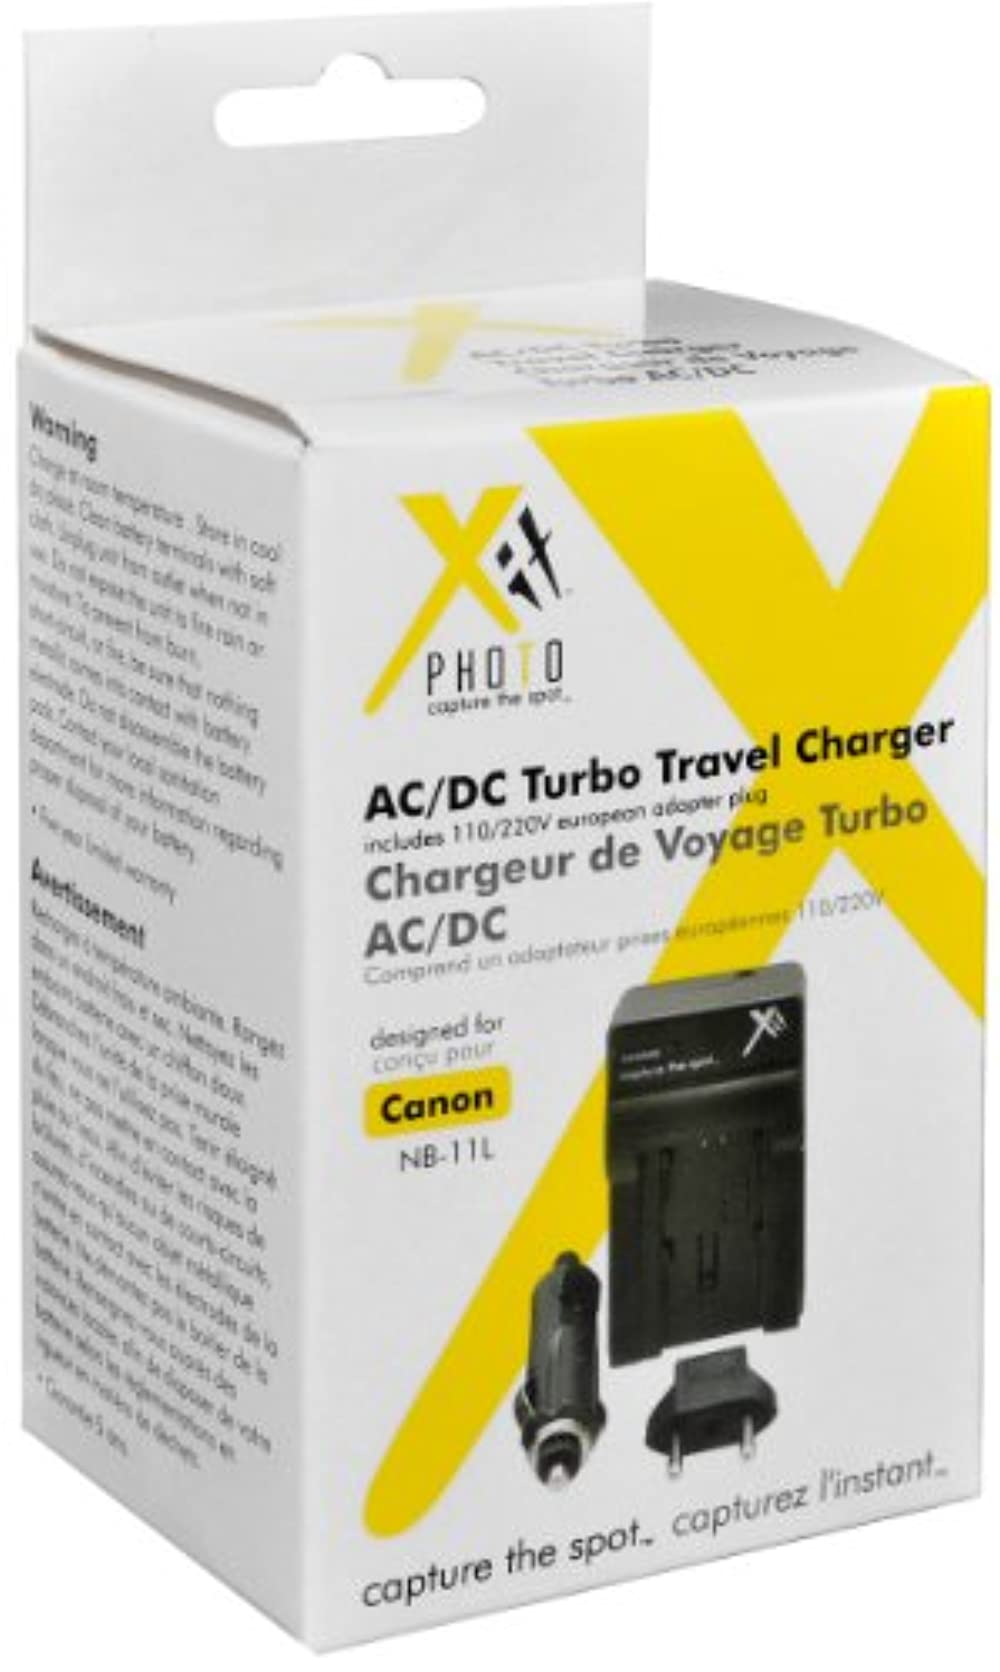 XIT worldwide AC/DC travel charger 110-220V F/CANON NB-11L - image 2 of 2